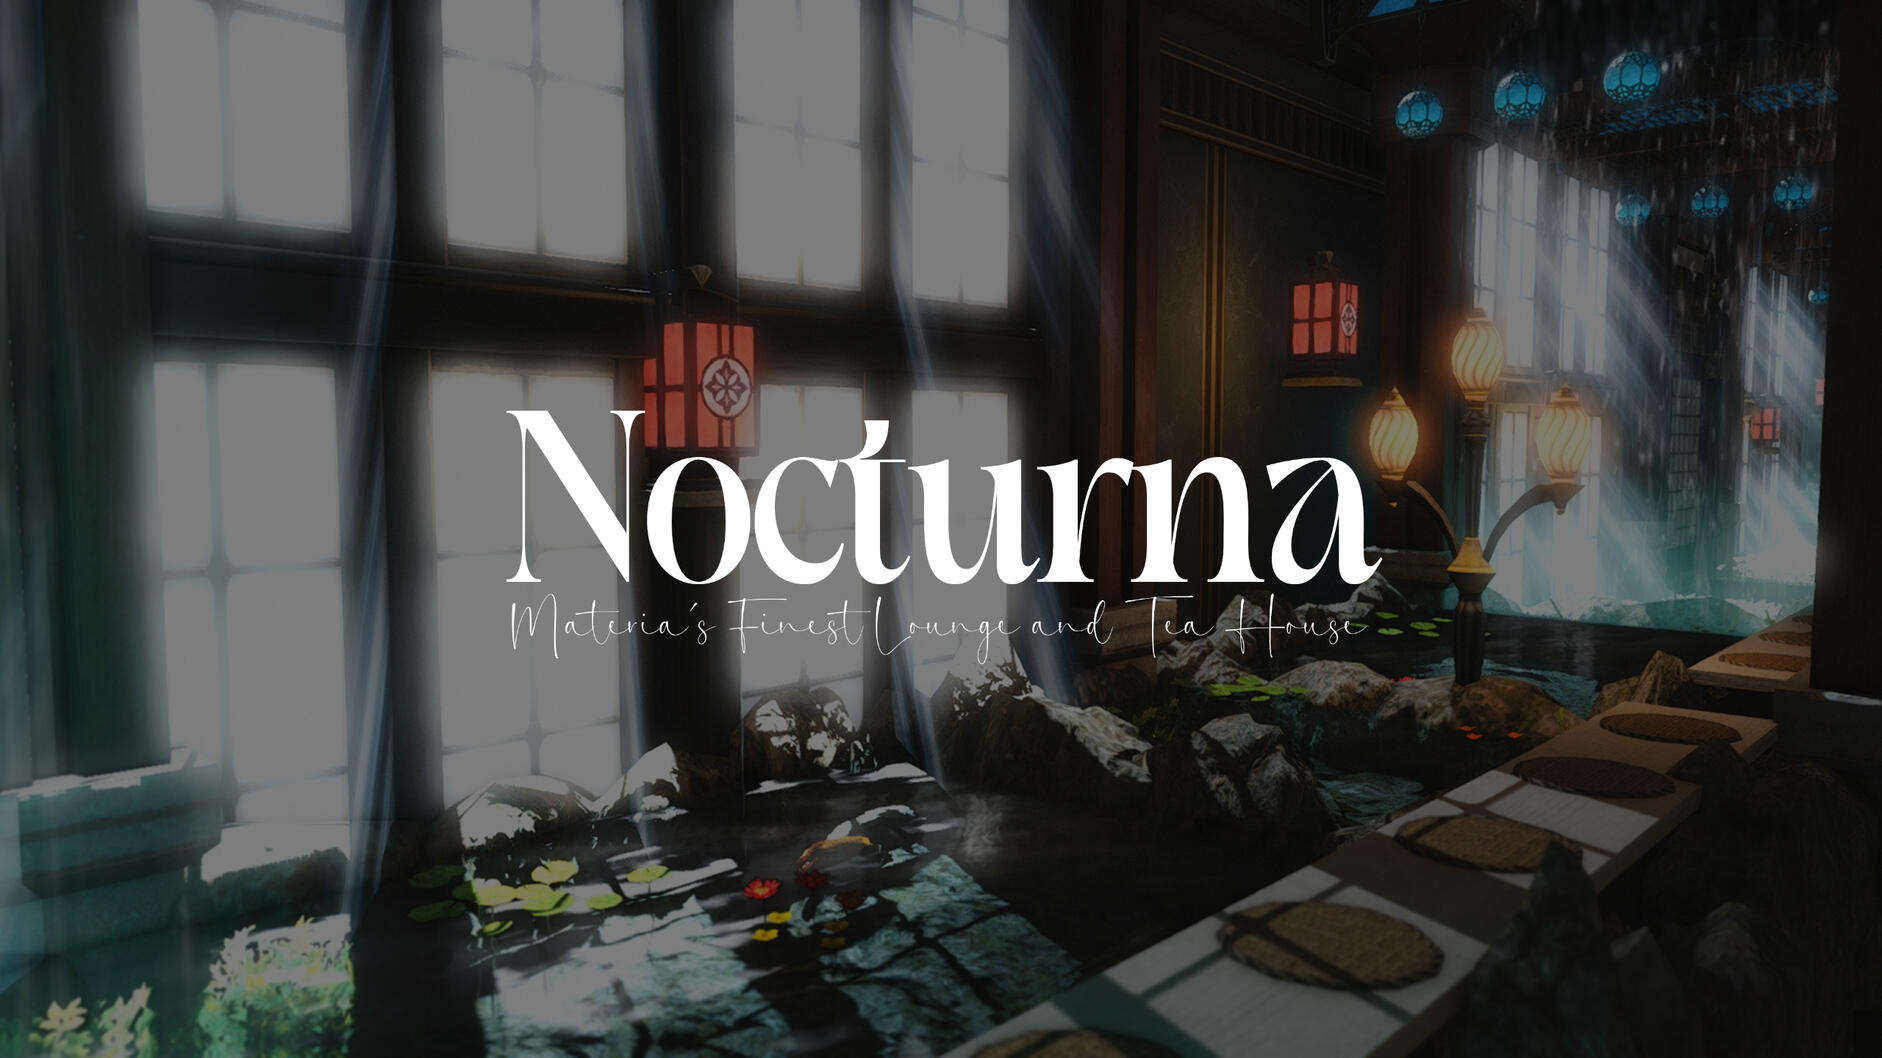 Nocturna Lounge and Tea House